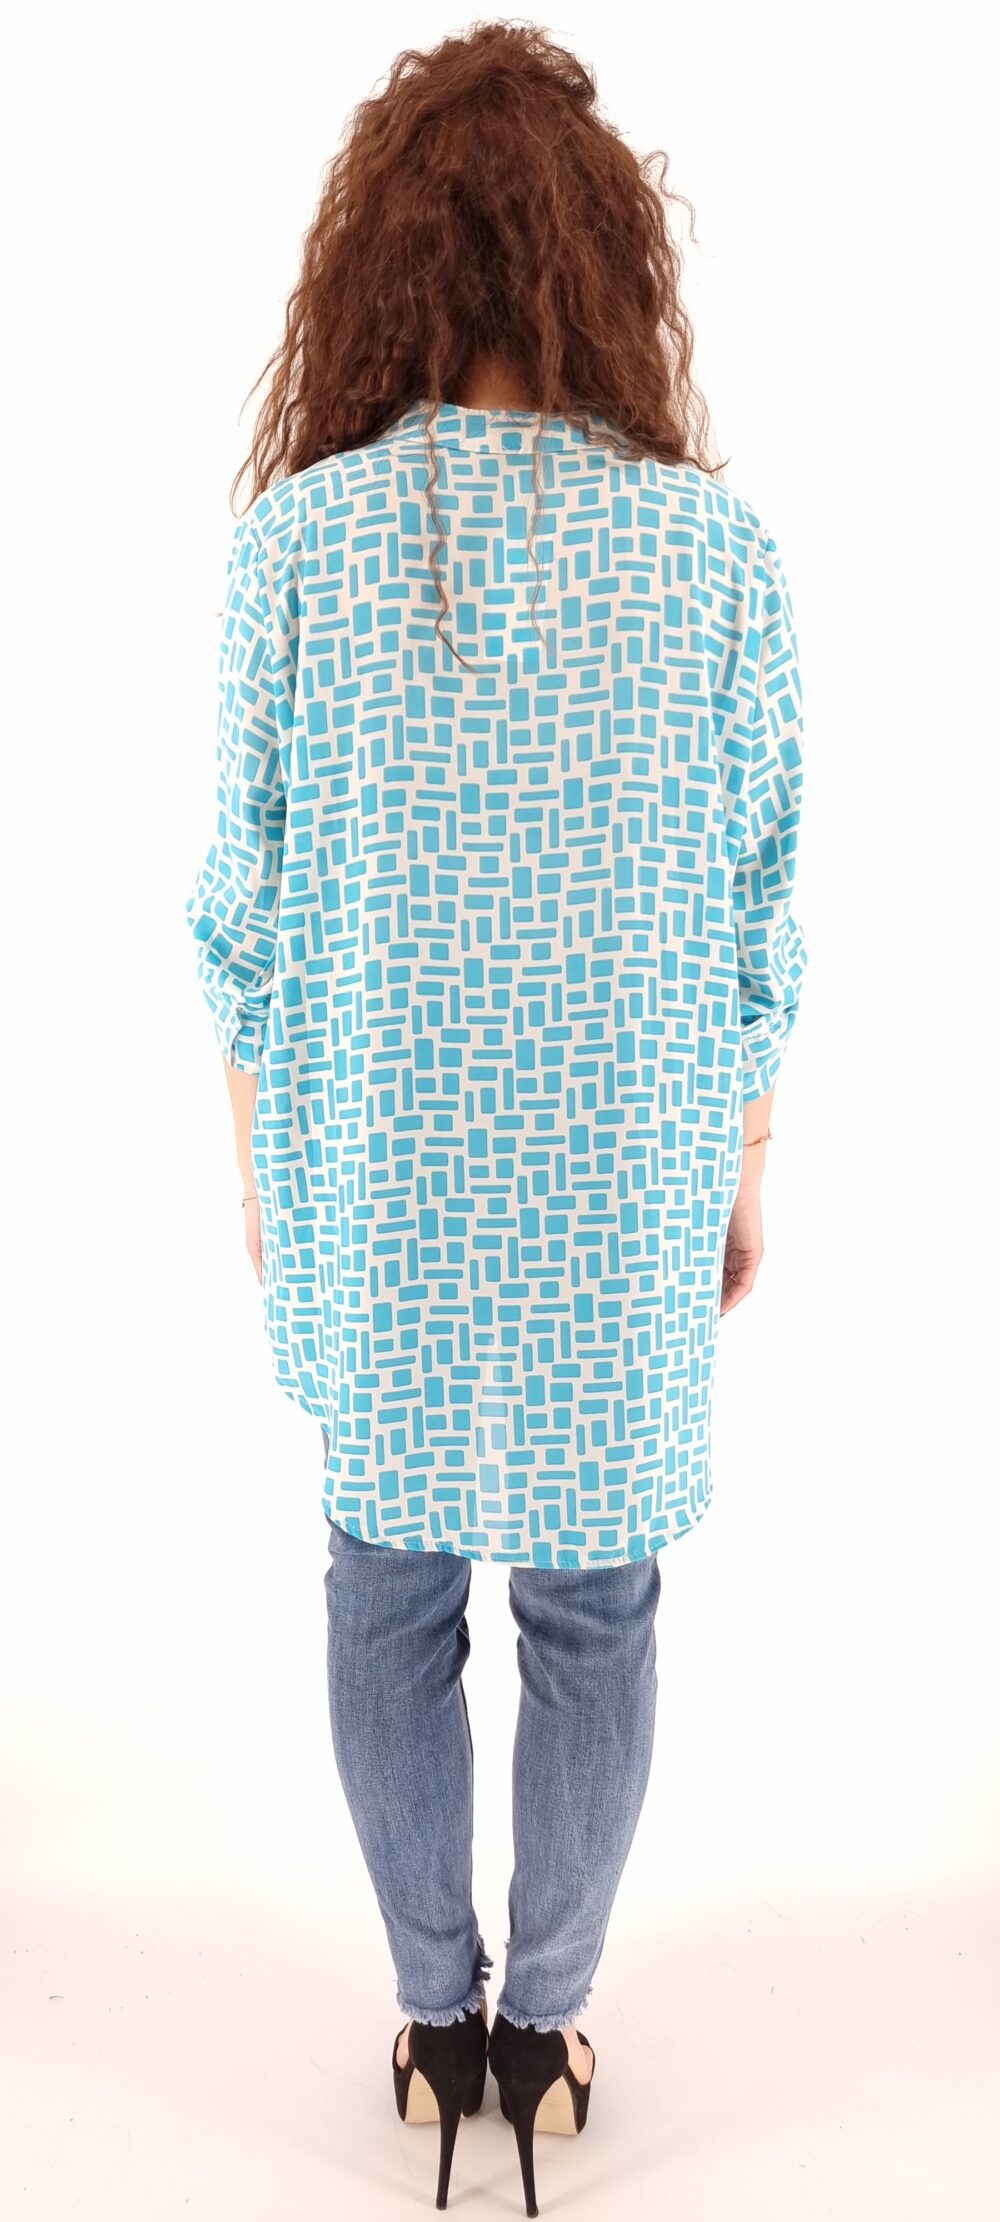 Shirts with a pattern of geometric shapes white light blue